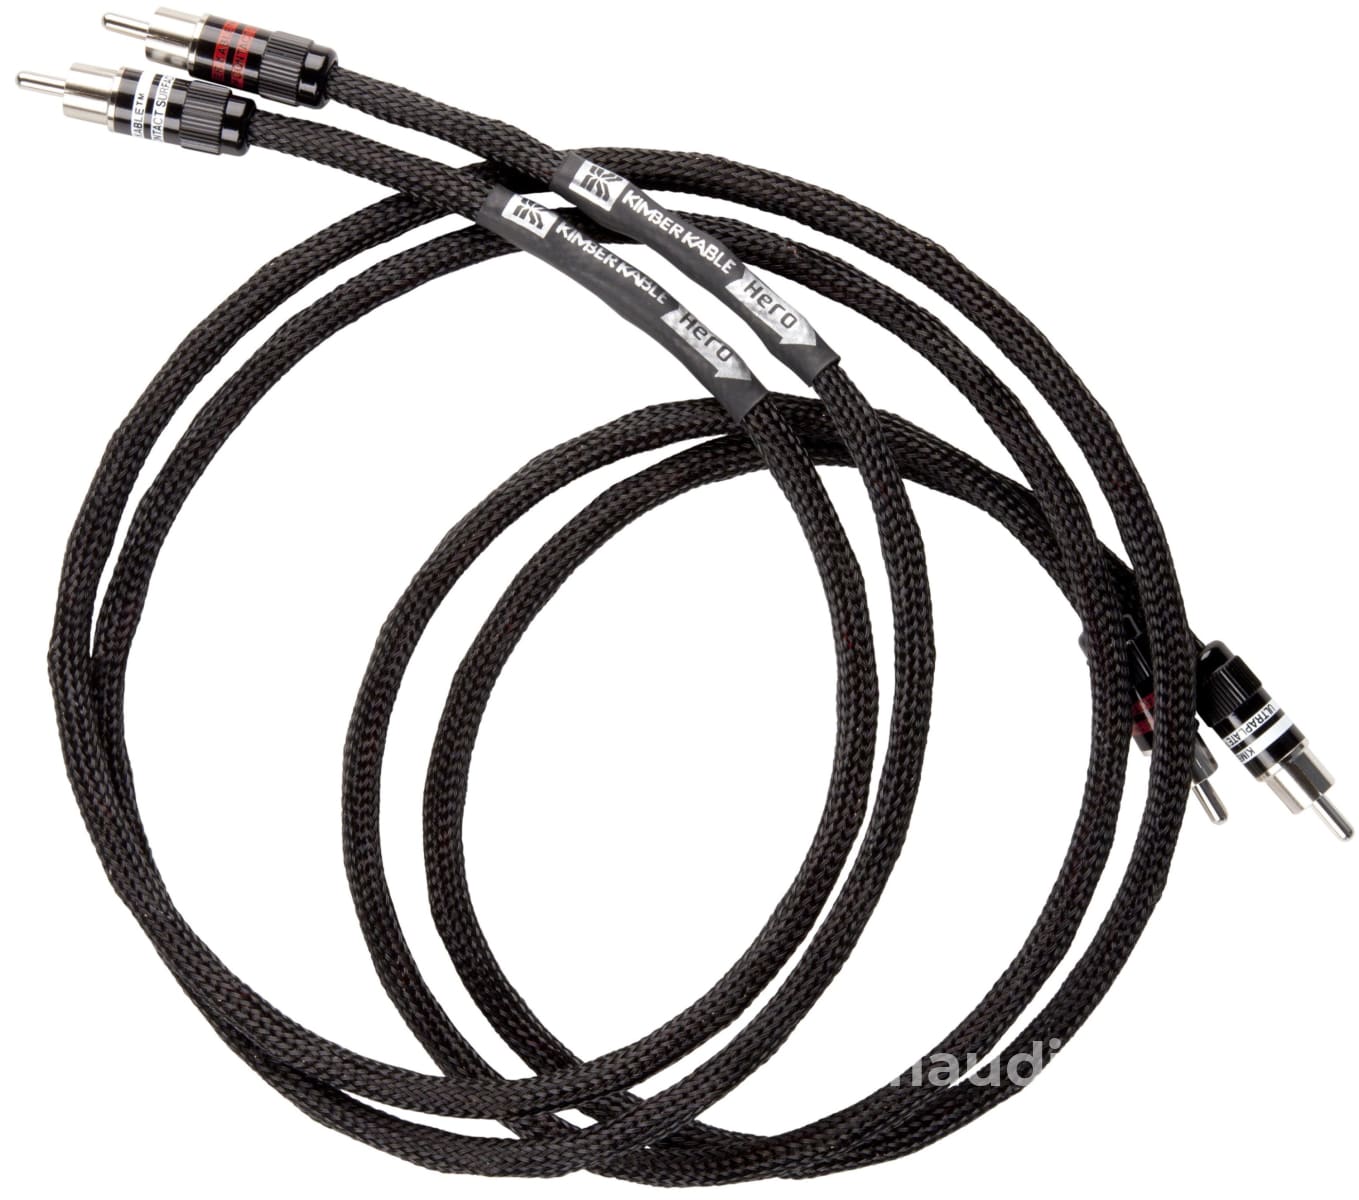 Kimber Kable - Ascent Series Hero Analog Interconnects (Pair) Rca Ultraplate Or Wbt Connectors New